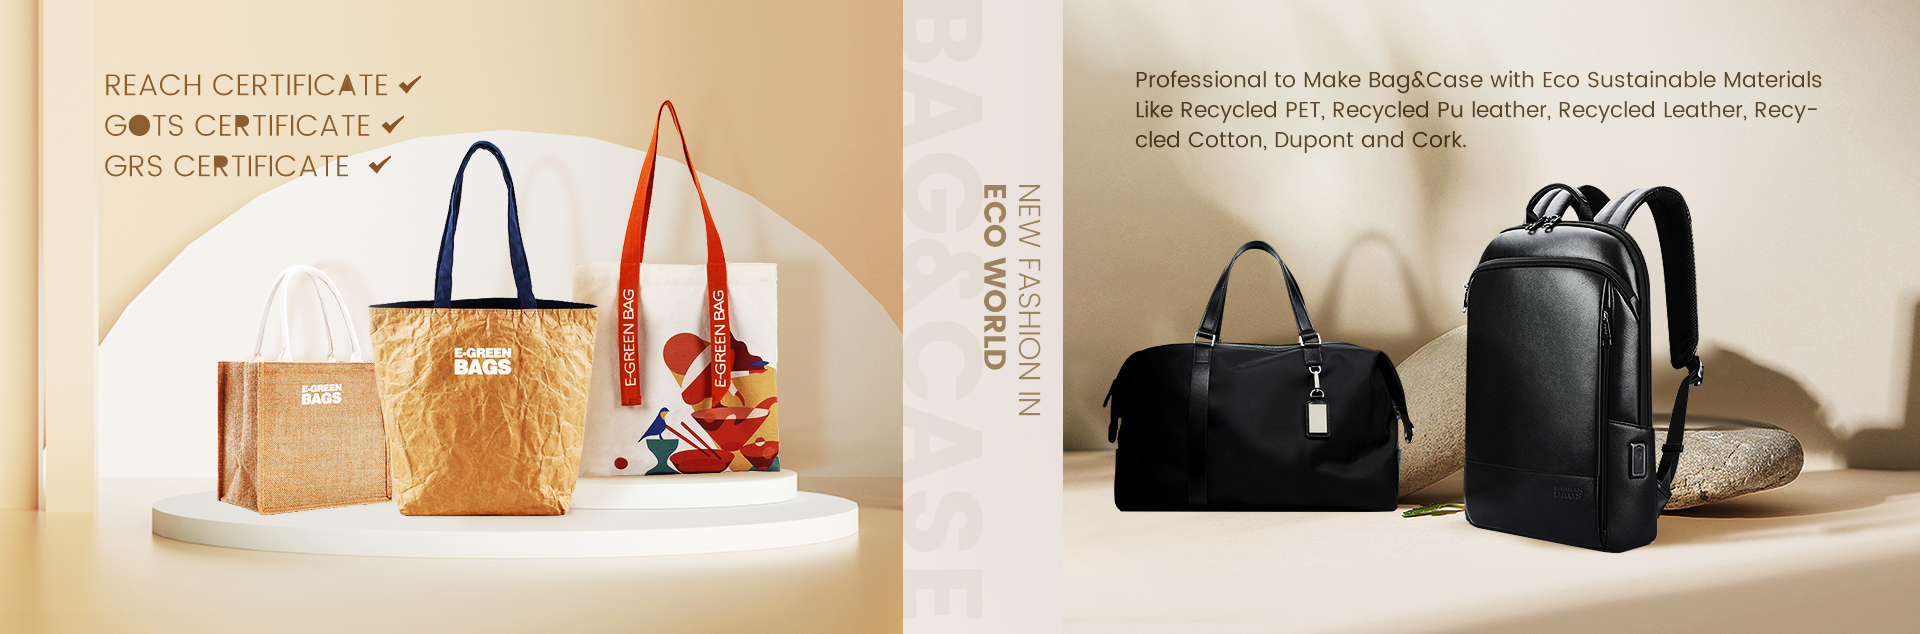 Professional manufacturer of customized bags and cases.